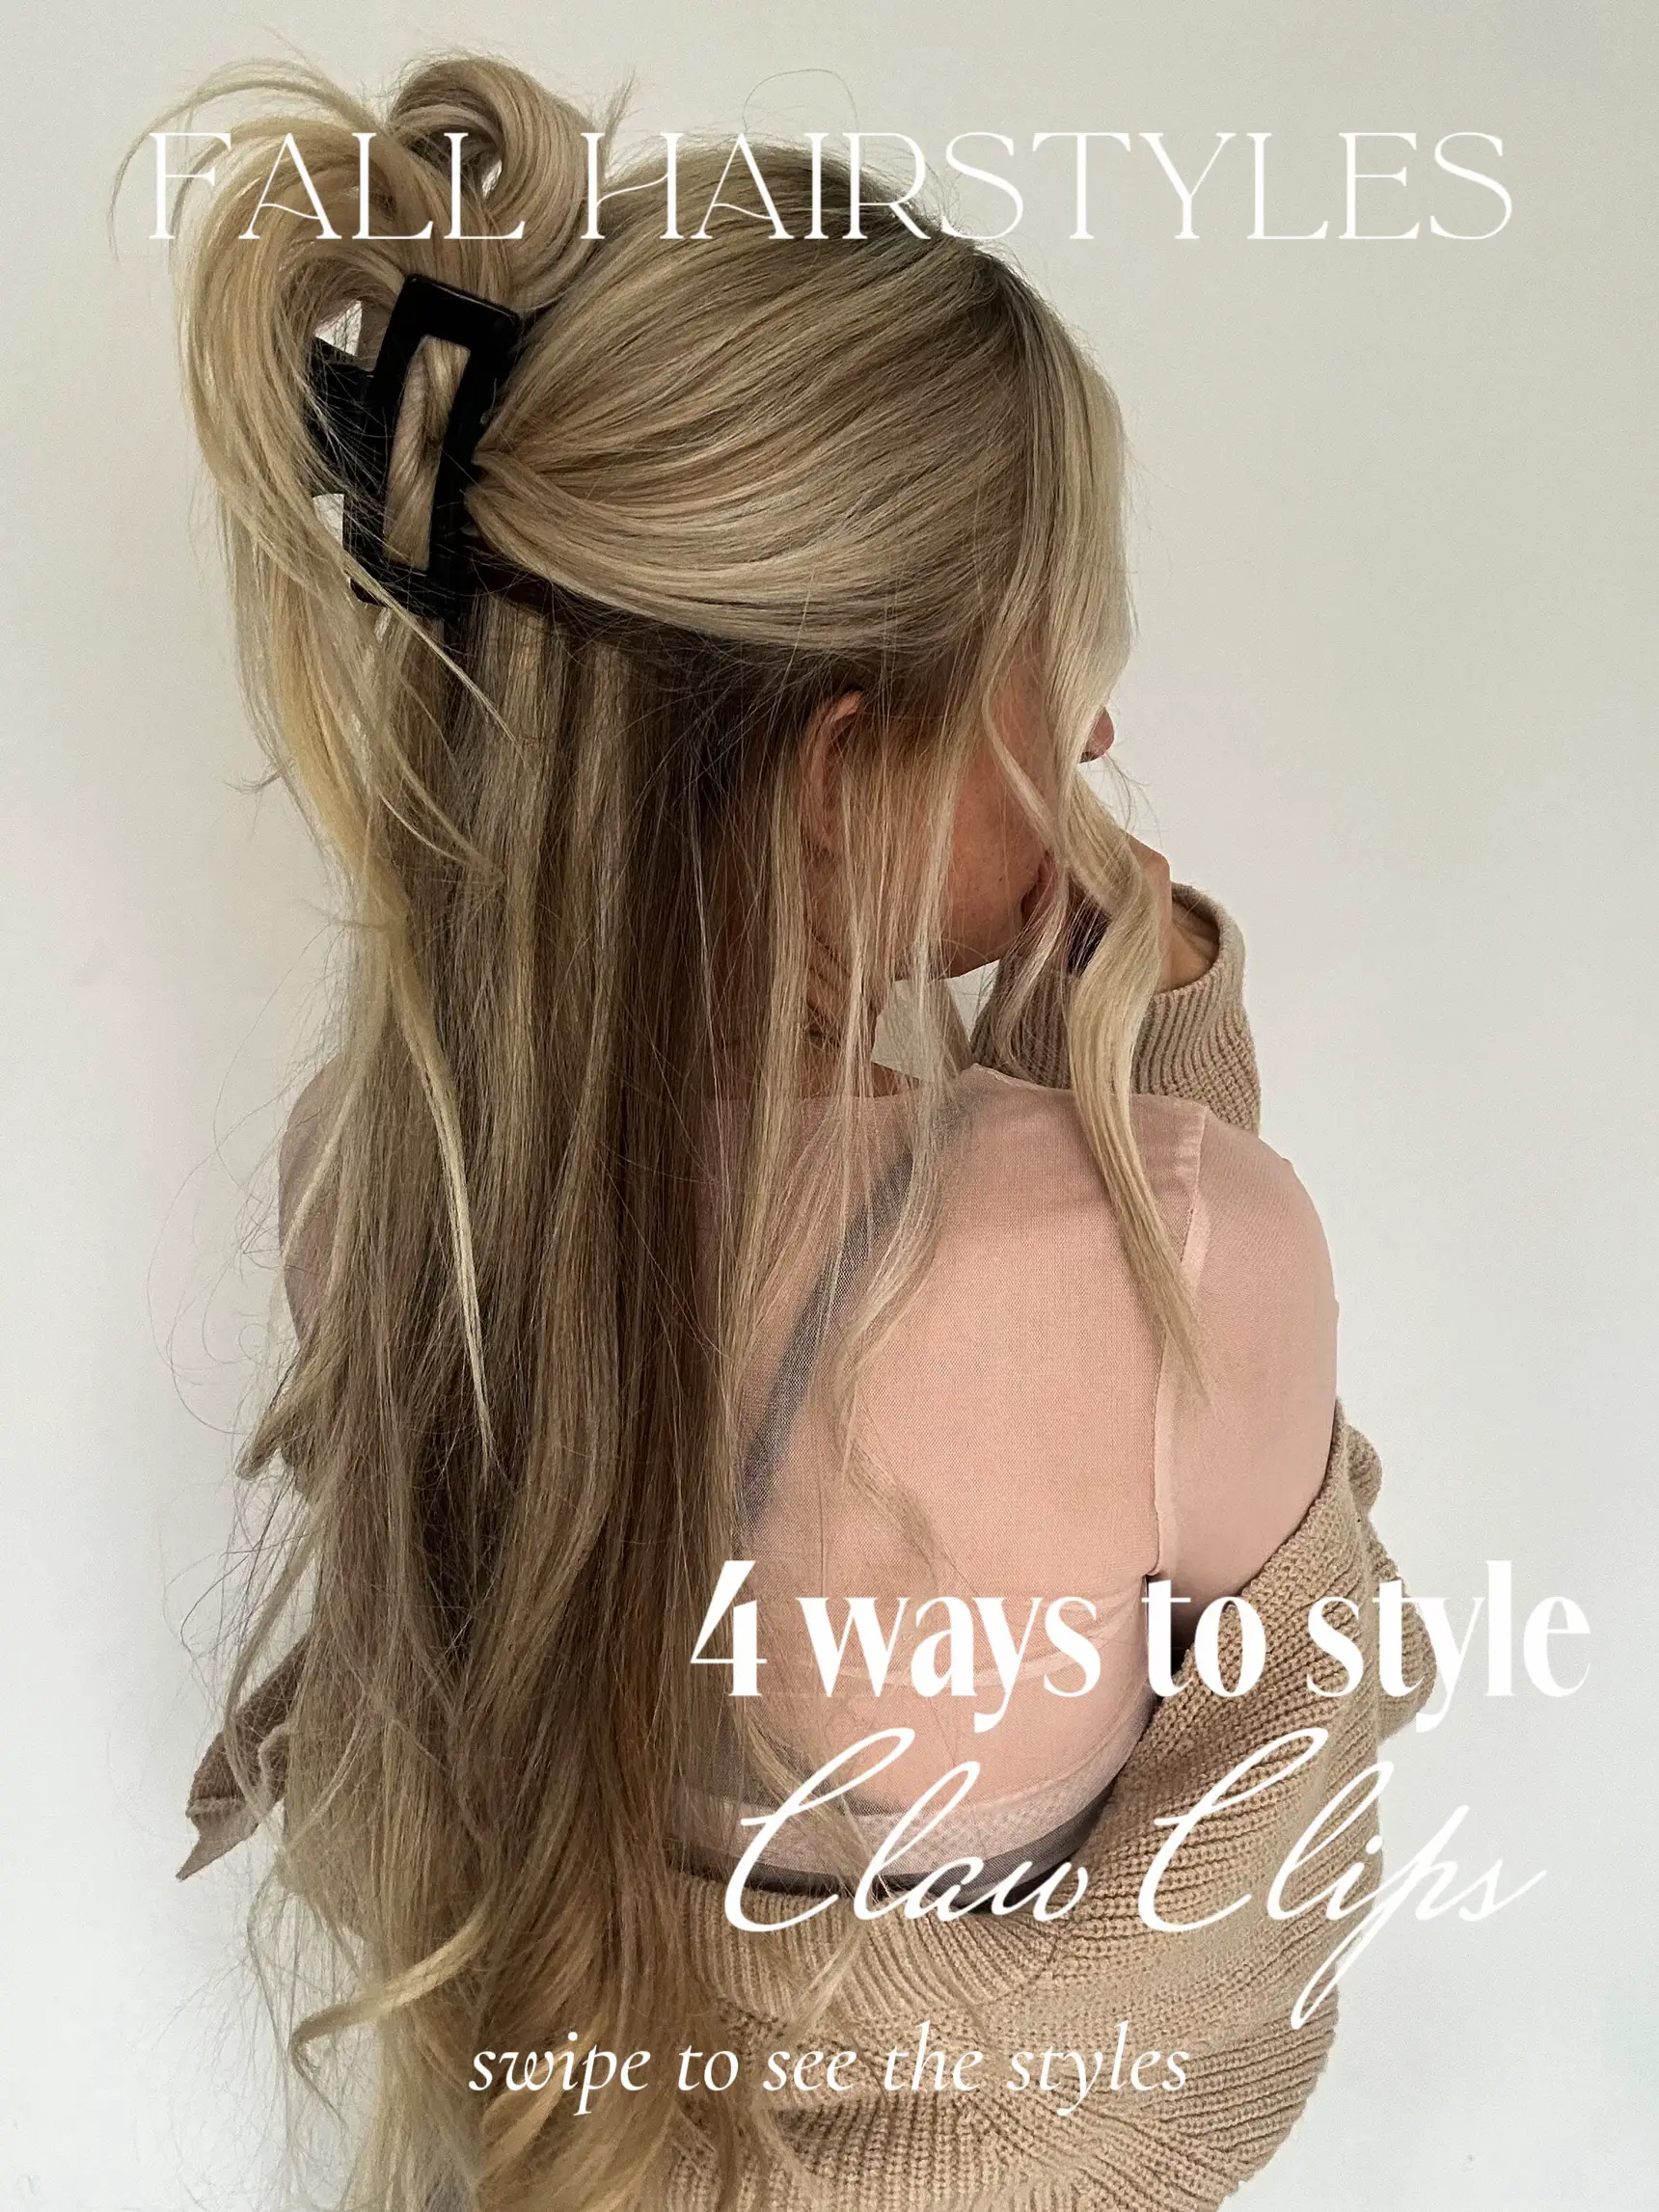 4 ways to style a Claw Clip ✨, Gallery posted by Jordan Ellis